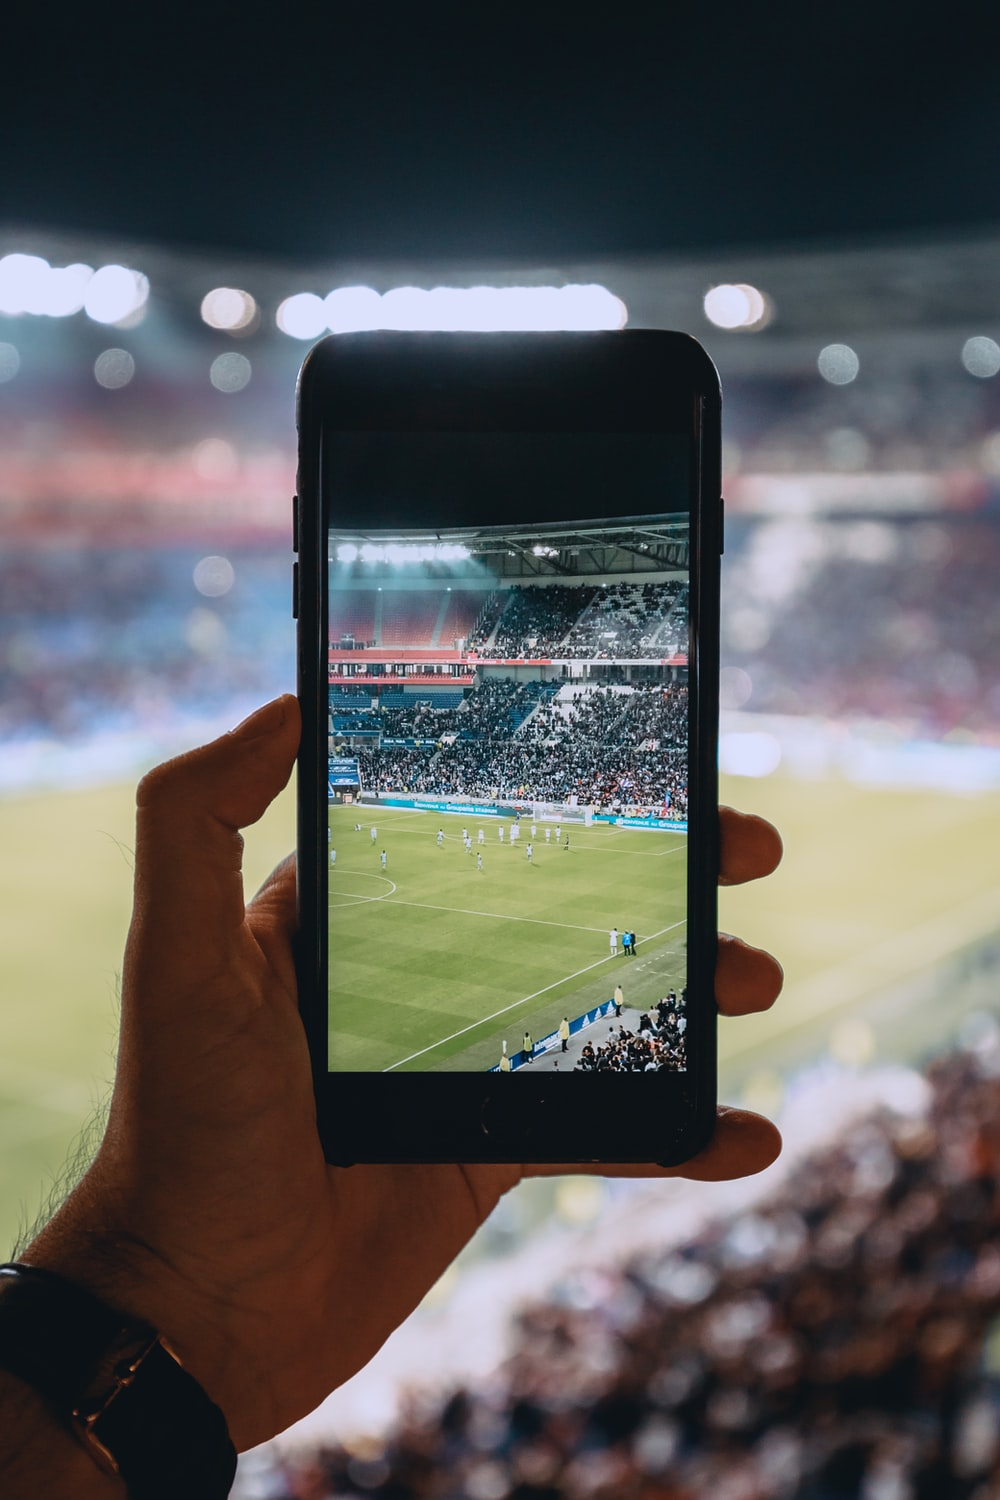 A bettor in the football stadium holding cellphone 